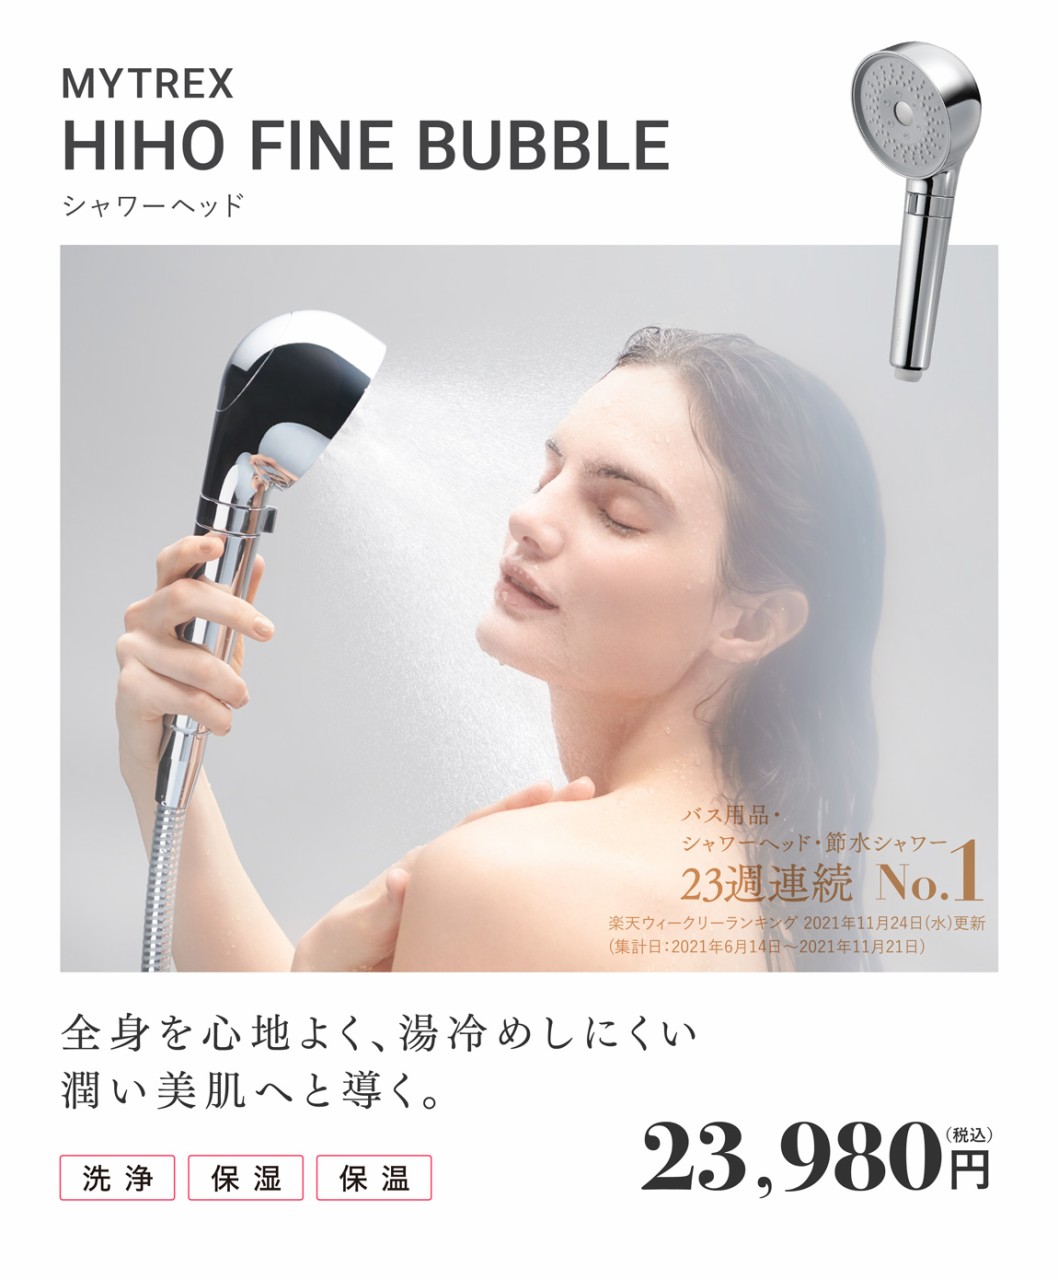 MYTREX HIHO FINE BUBBLE